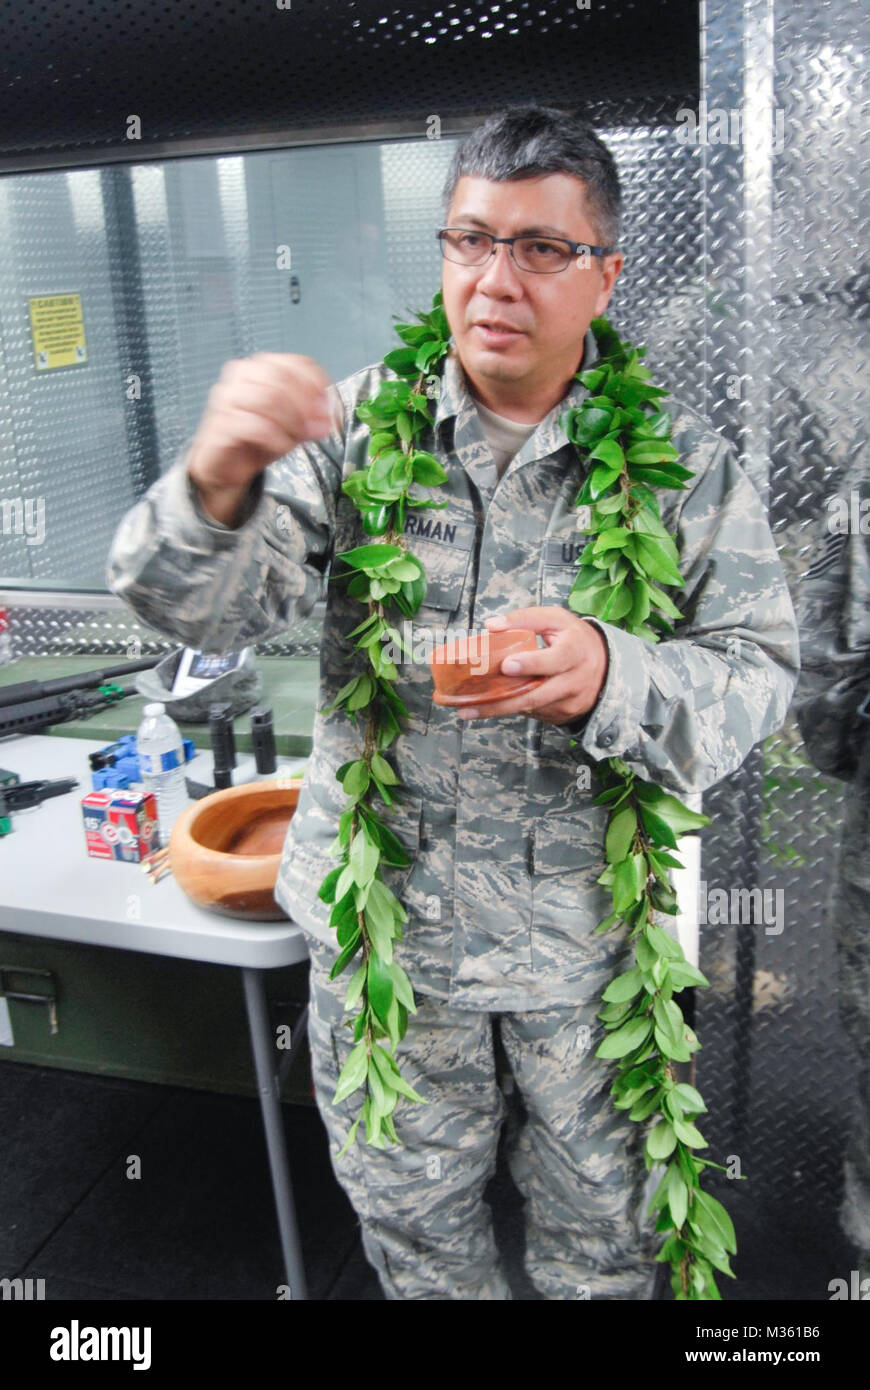 U.S. Air Force Chaplain Daniel Leatherman, 154 Wing Headquarters, performs a blessing at the 154 Security Forces Squadron (SFS) Indoor Firing Range on Joint Base Pearl Harbor-Hickam, Hawaii, Aug. 8, 2015. Salt is spread throughout the facility by the Chaplain and members of the 154 SFS as a way to purify and protect the facility. (U.S. Air National Guard photo by Airman 1st Class Robert Cabuco) 150808-Z-UW413-005.jpg by Hawaii Air National Guard Stock Photo